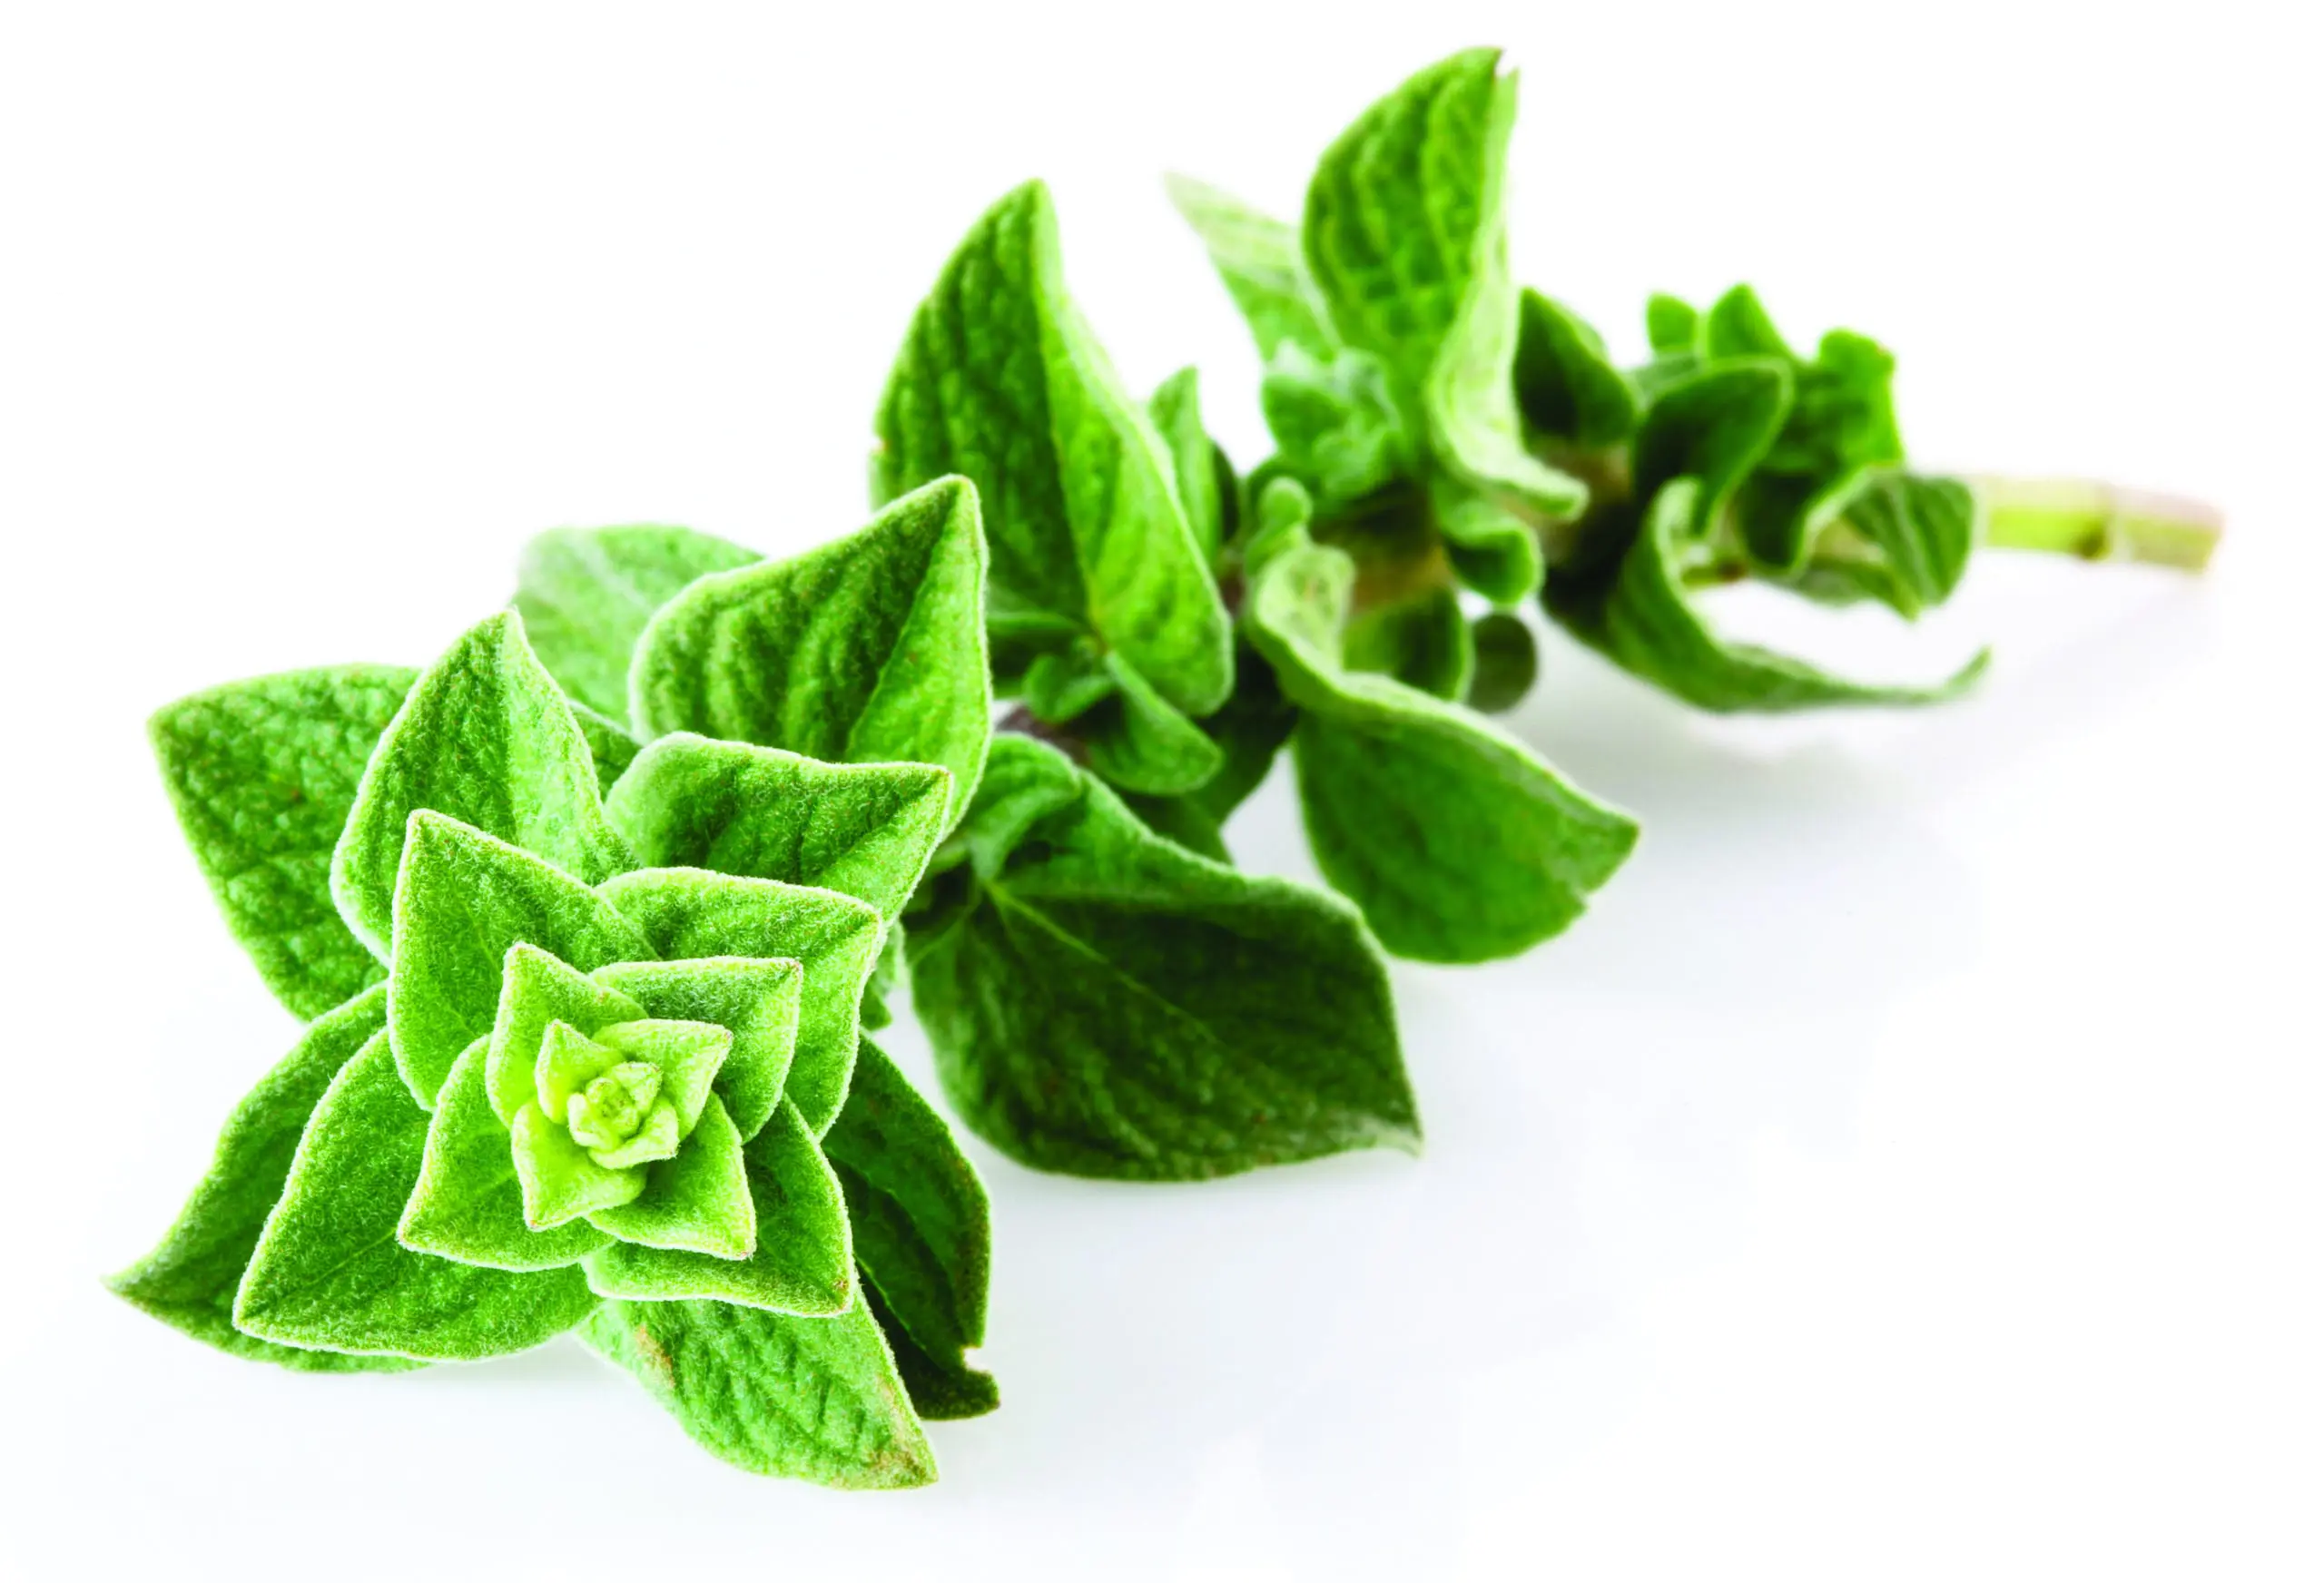 Featured image for “Healthy Minute: Oregano”